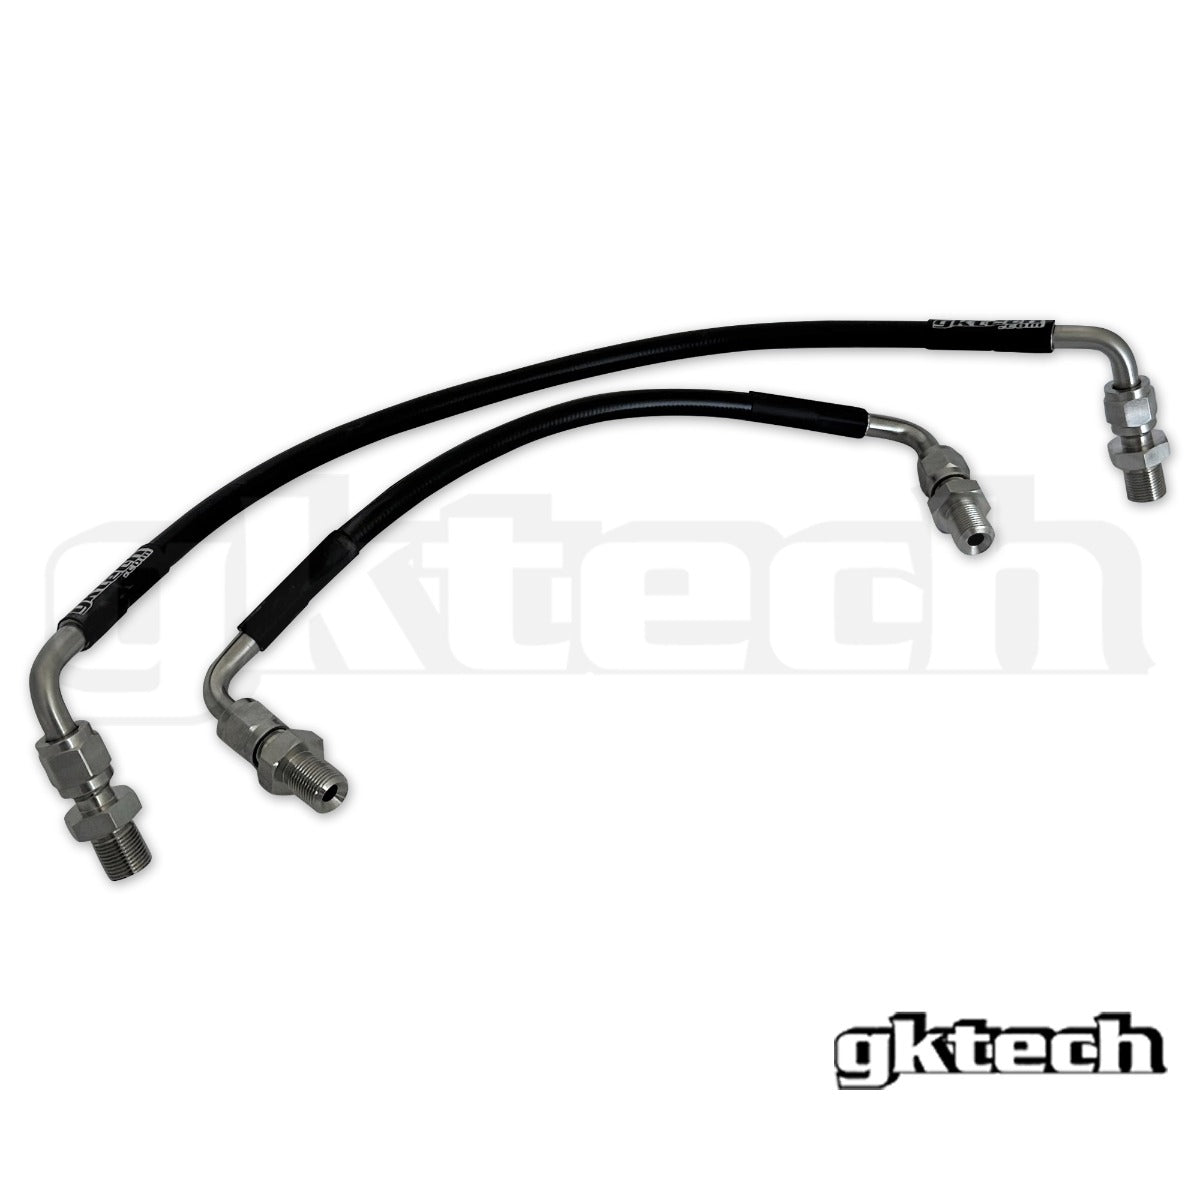 Z34 370z Power steering hard line replacements (pair)